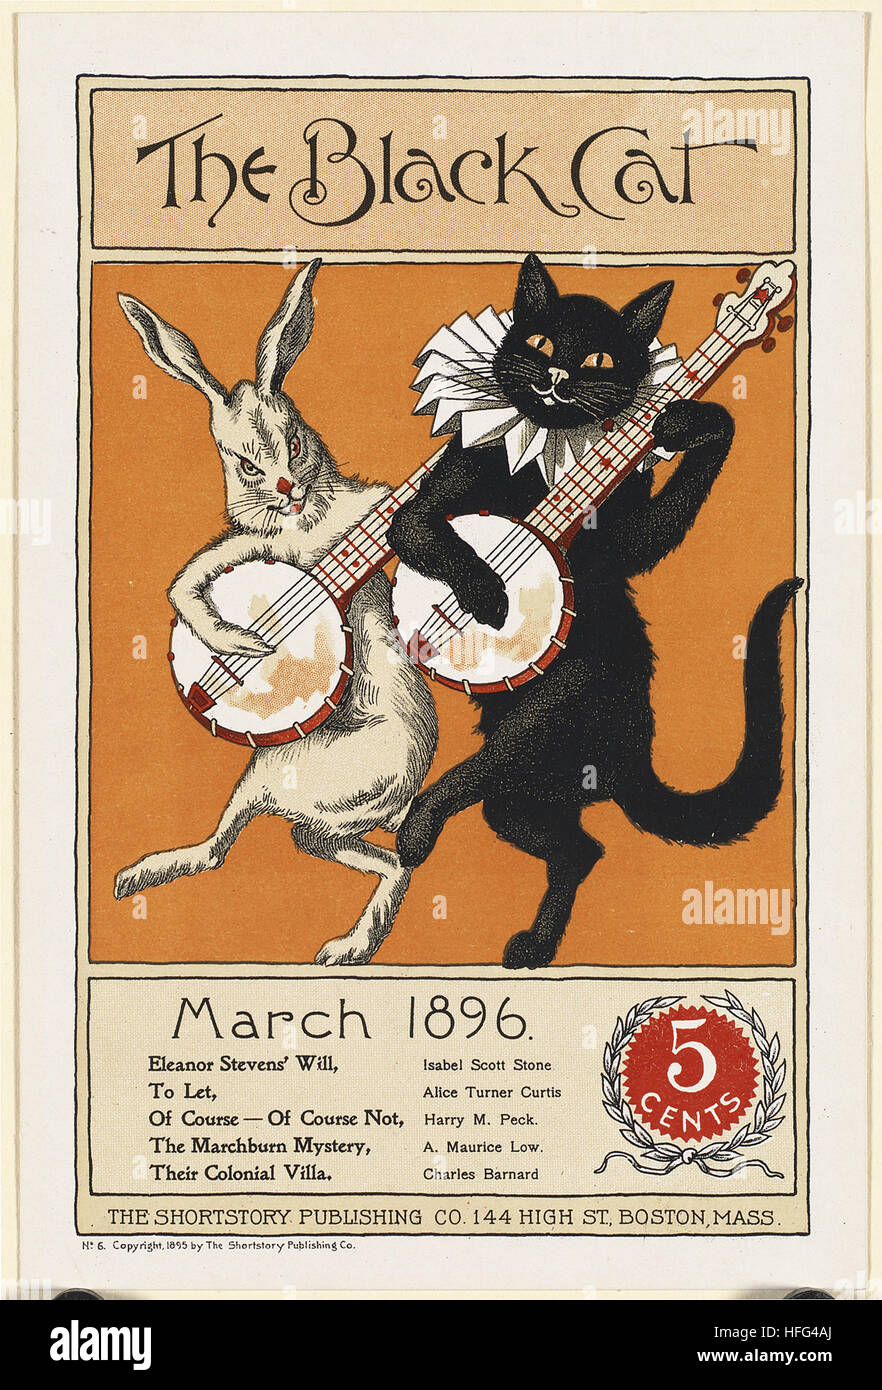 The black cat, March 1896. Stock Photo